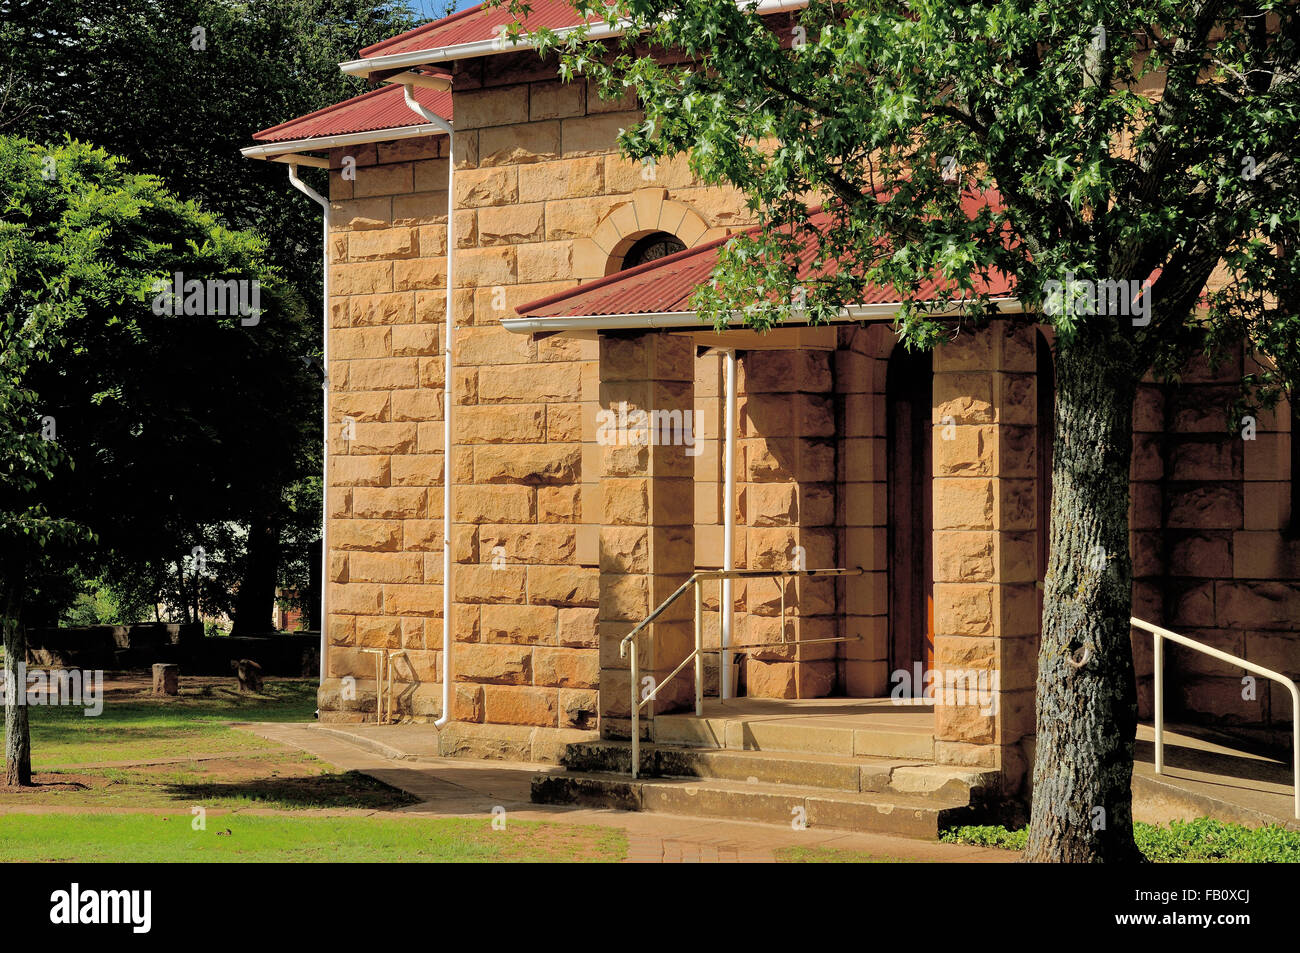 Excellent example of sandstone building. Dutch Reformed Church, Clarens South Africa Stock Photo